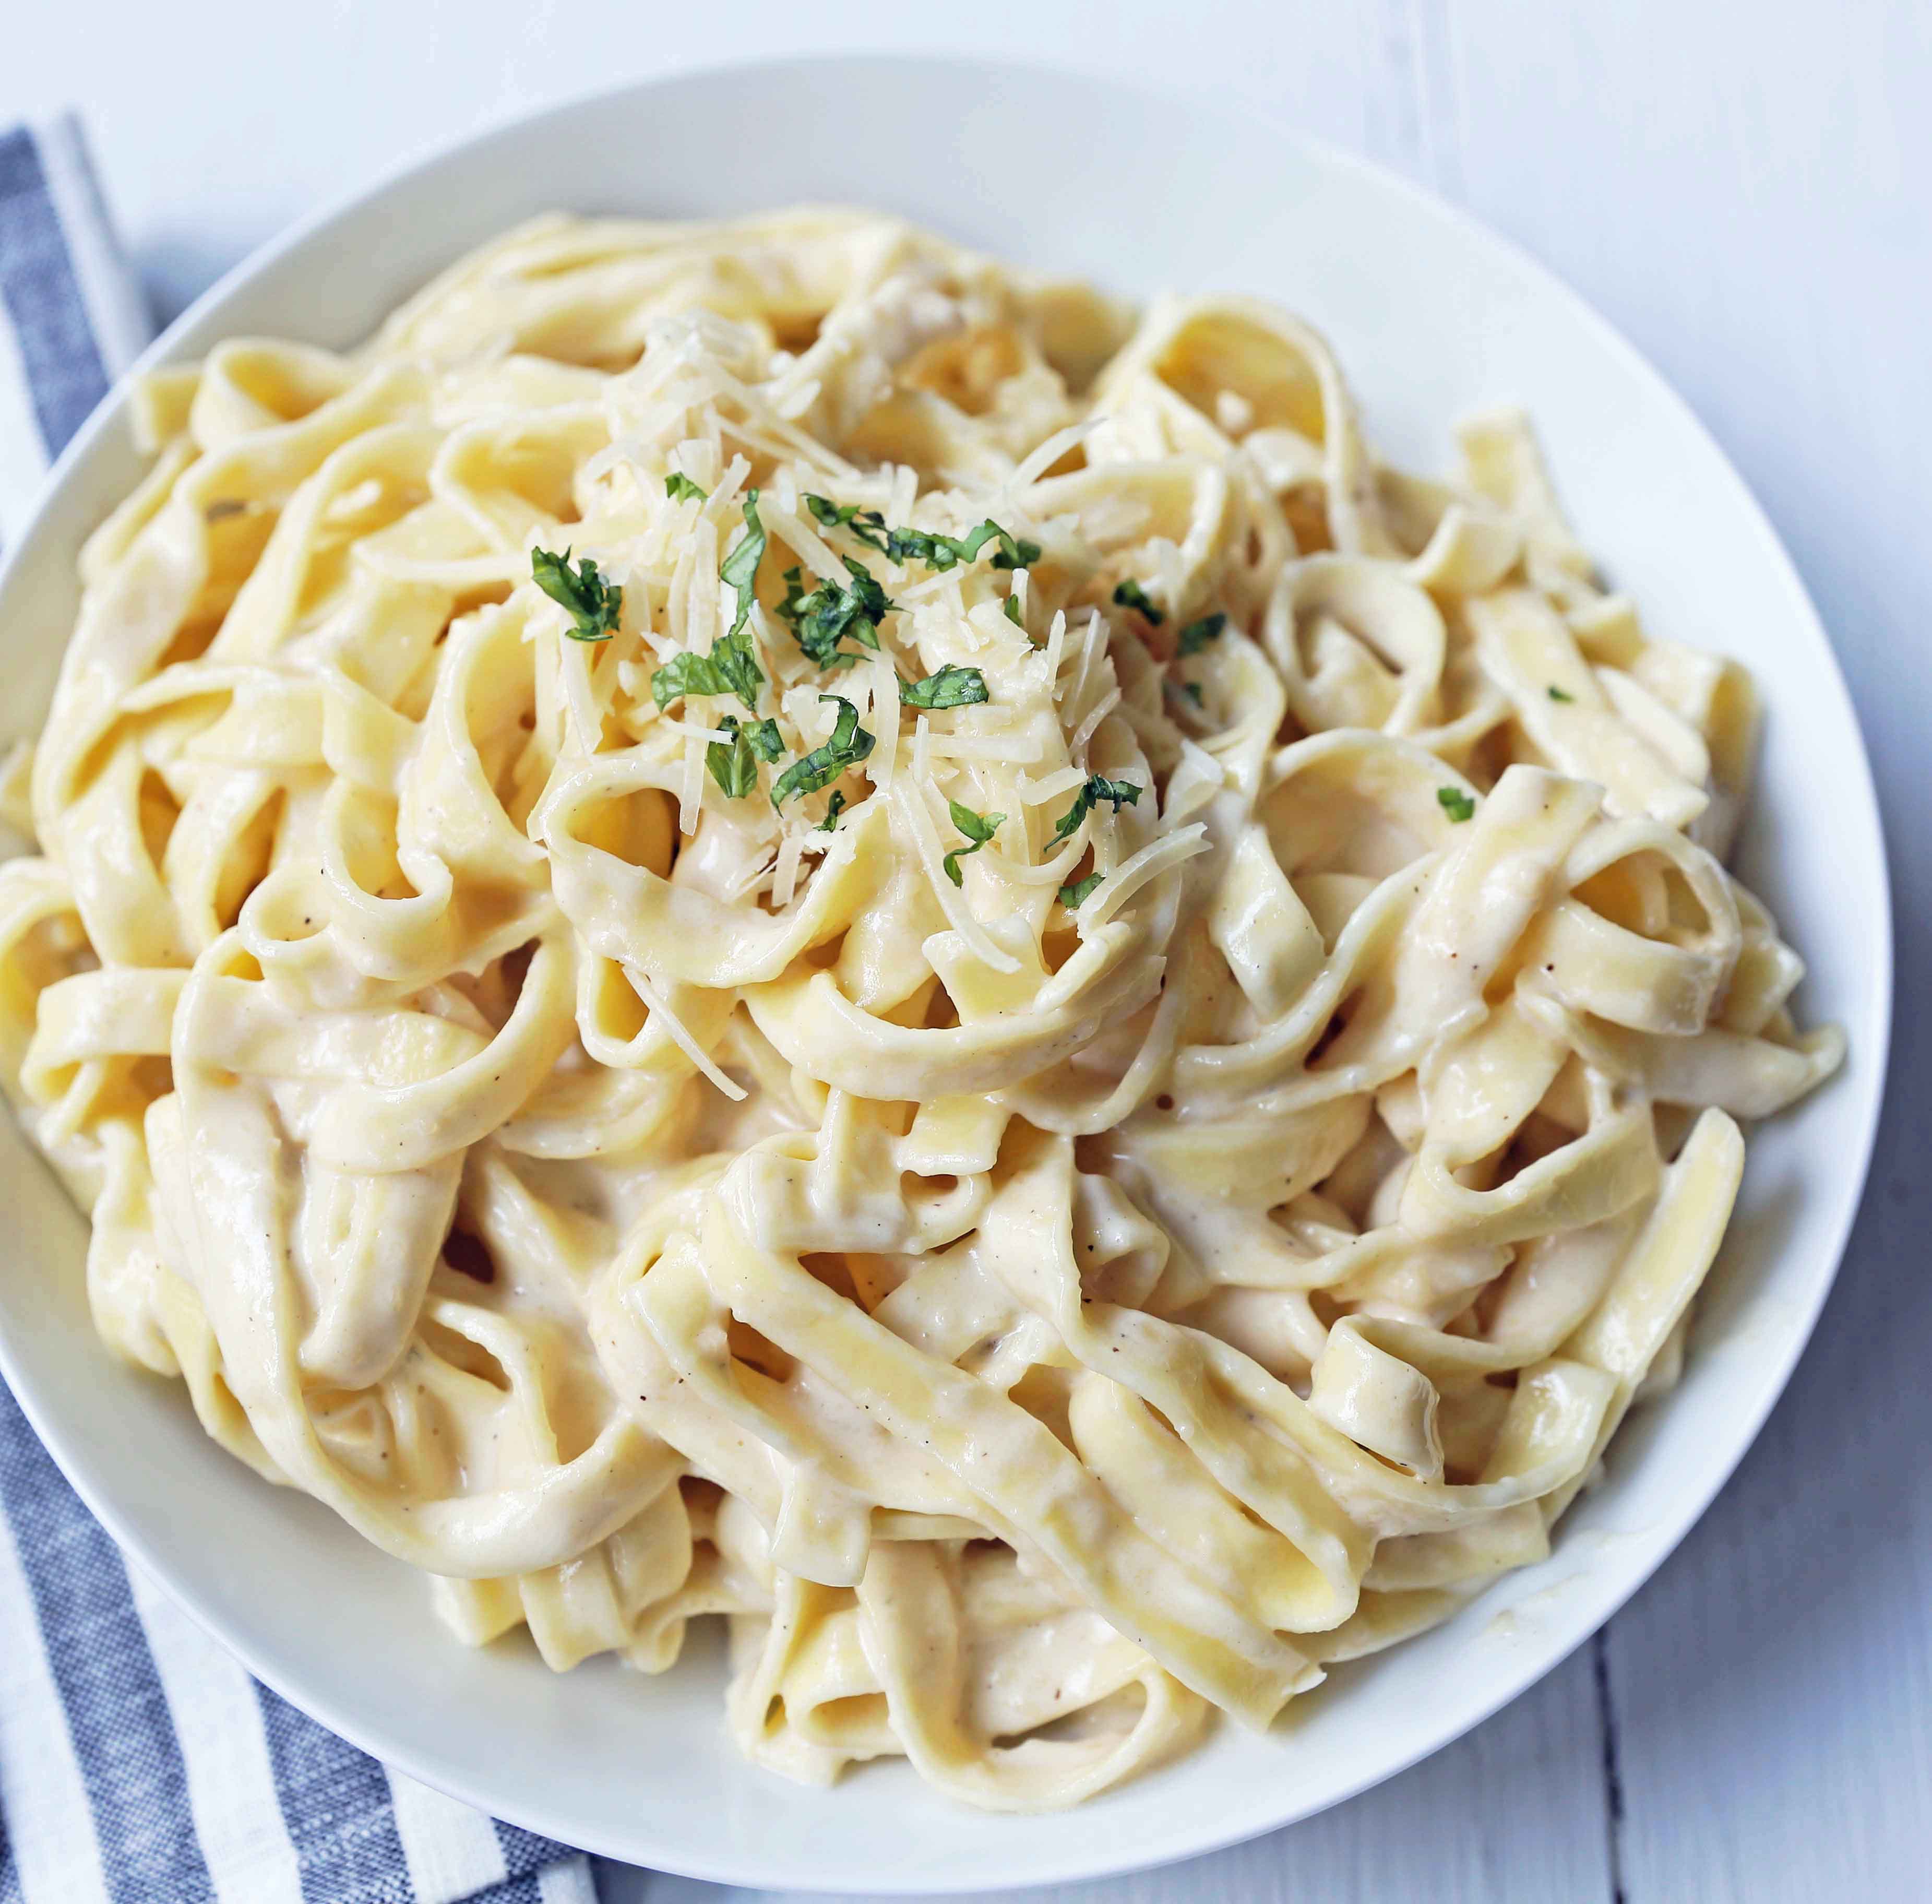 how long is alfredo sauce good for after expiration date